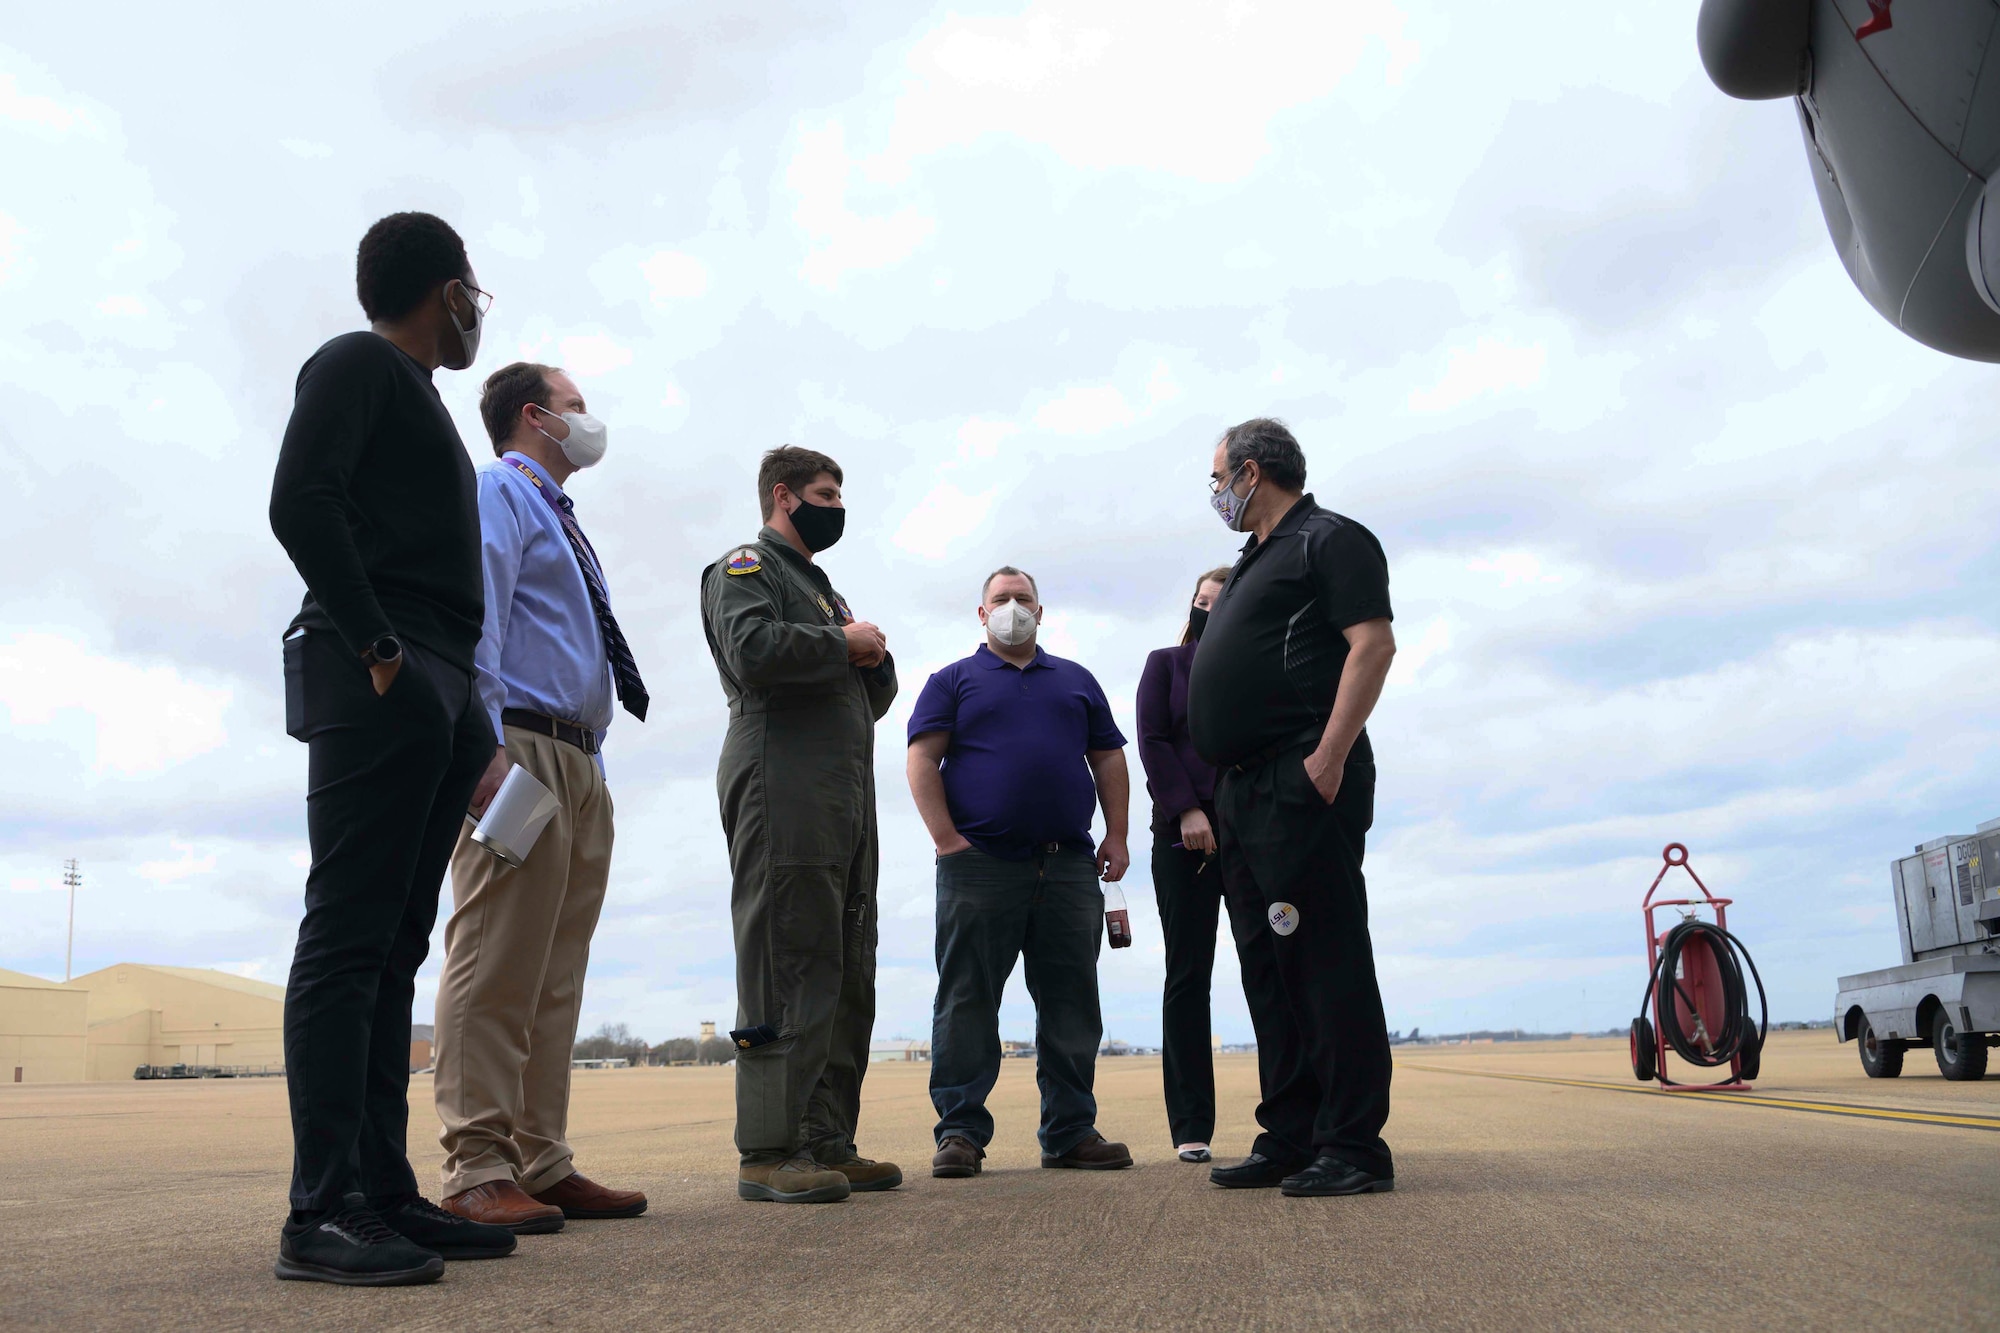 A group of people converse on the flight line at Barksdale Air Force Base.